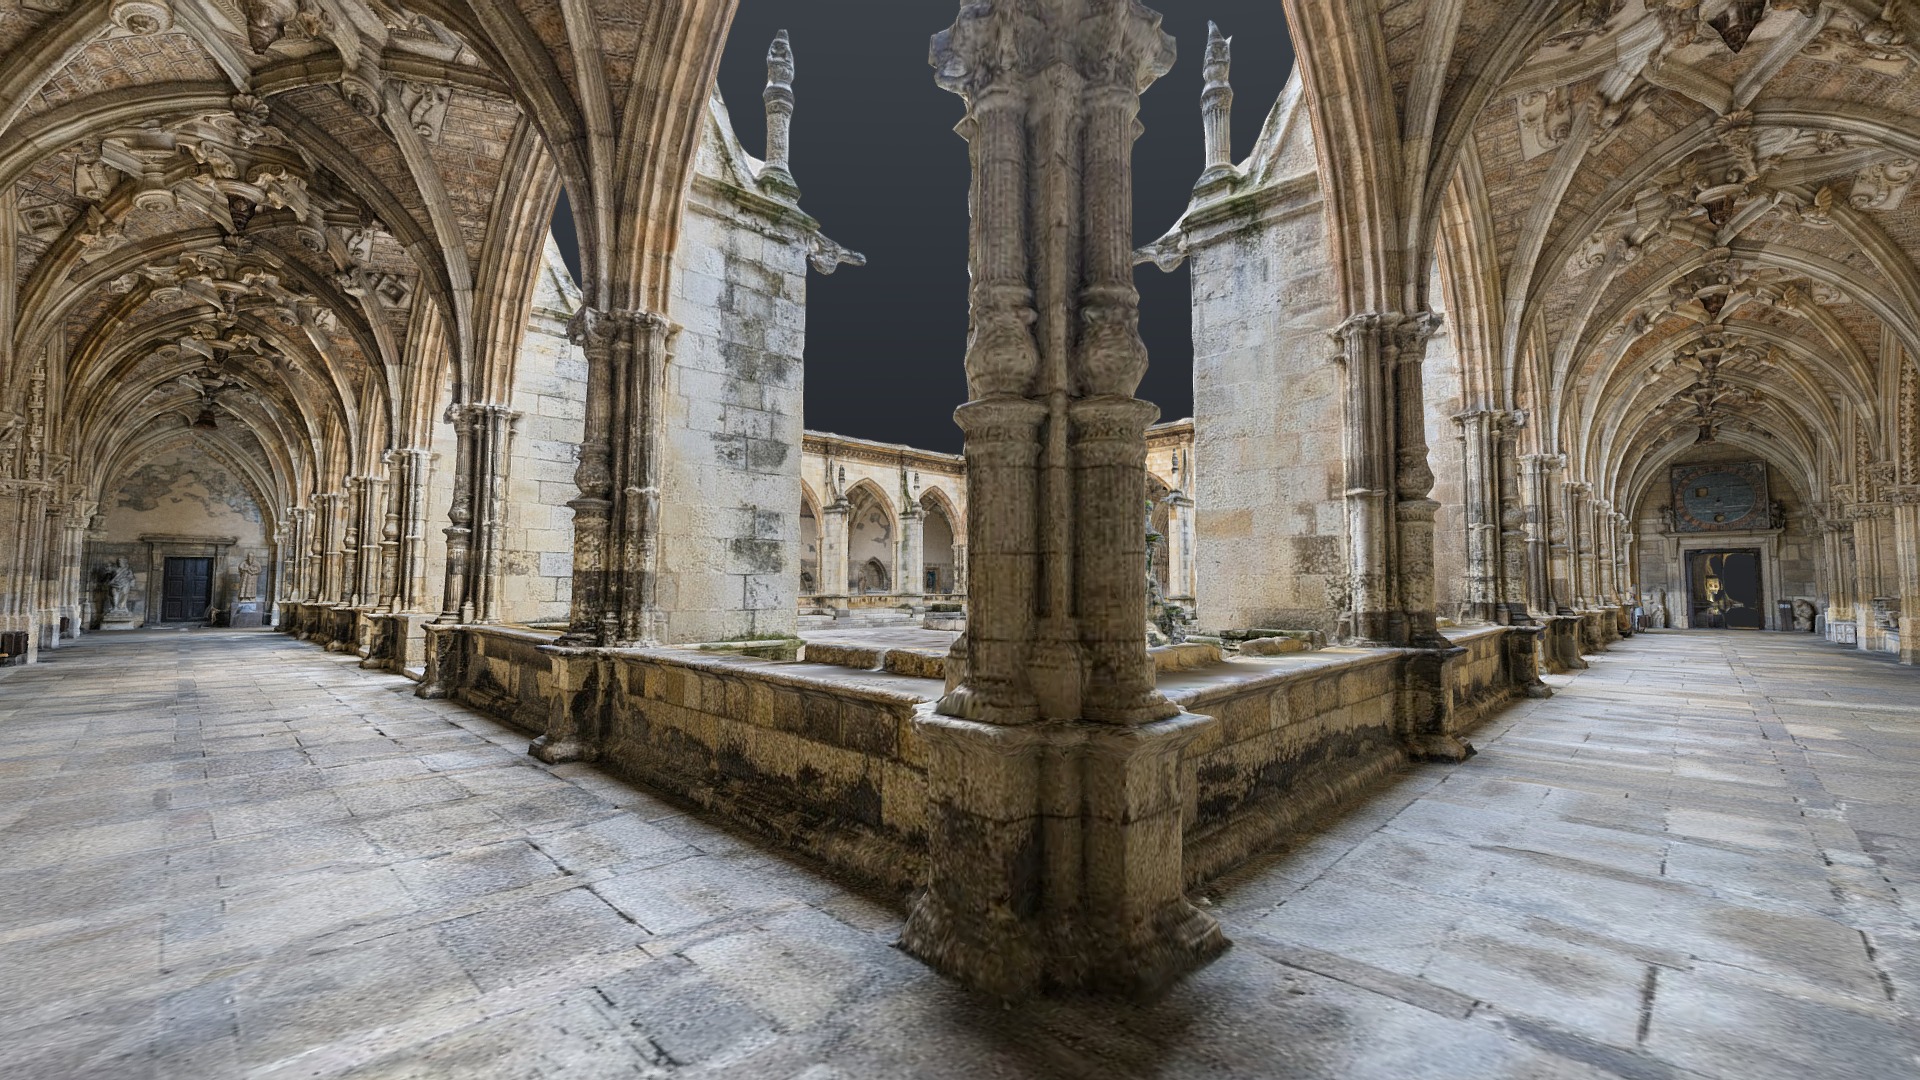 3D model Full León cathedral cloister photogrammetry scan - This is a 3D model of the Full León cathedral cloister photogrammetry scan. The 3D model is about a large stone building with a tall pillar in the middle.